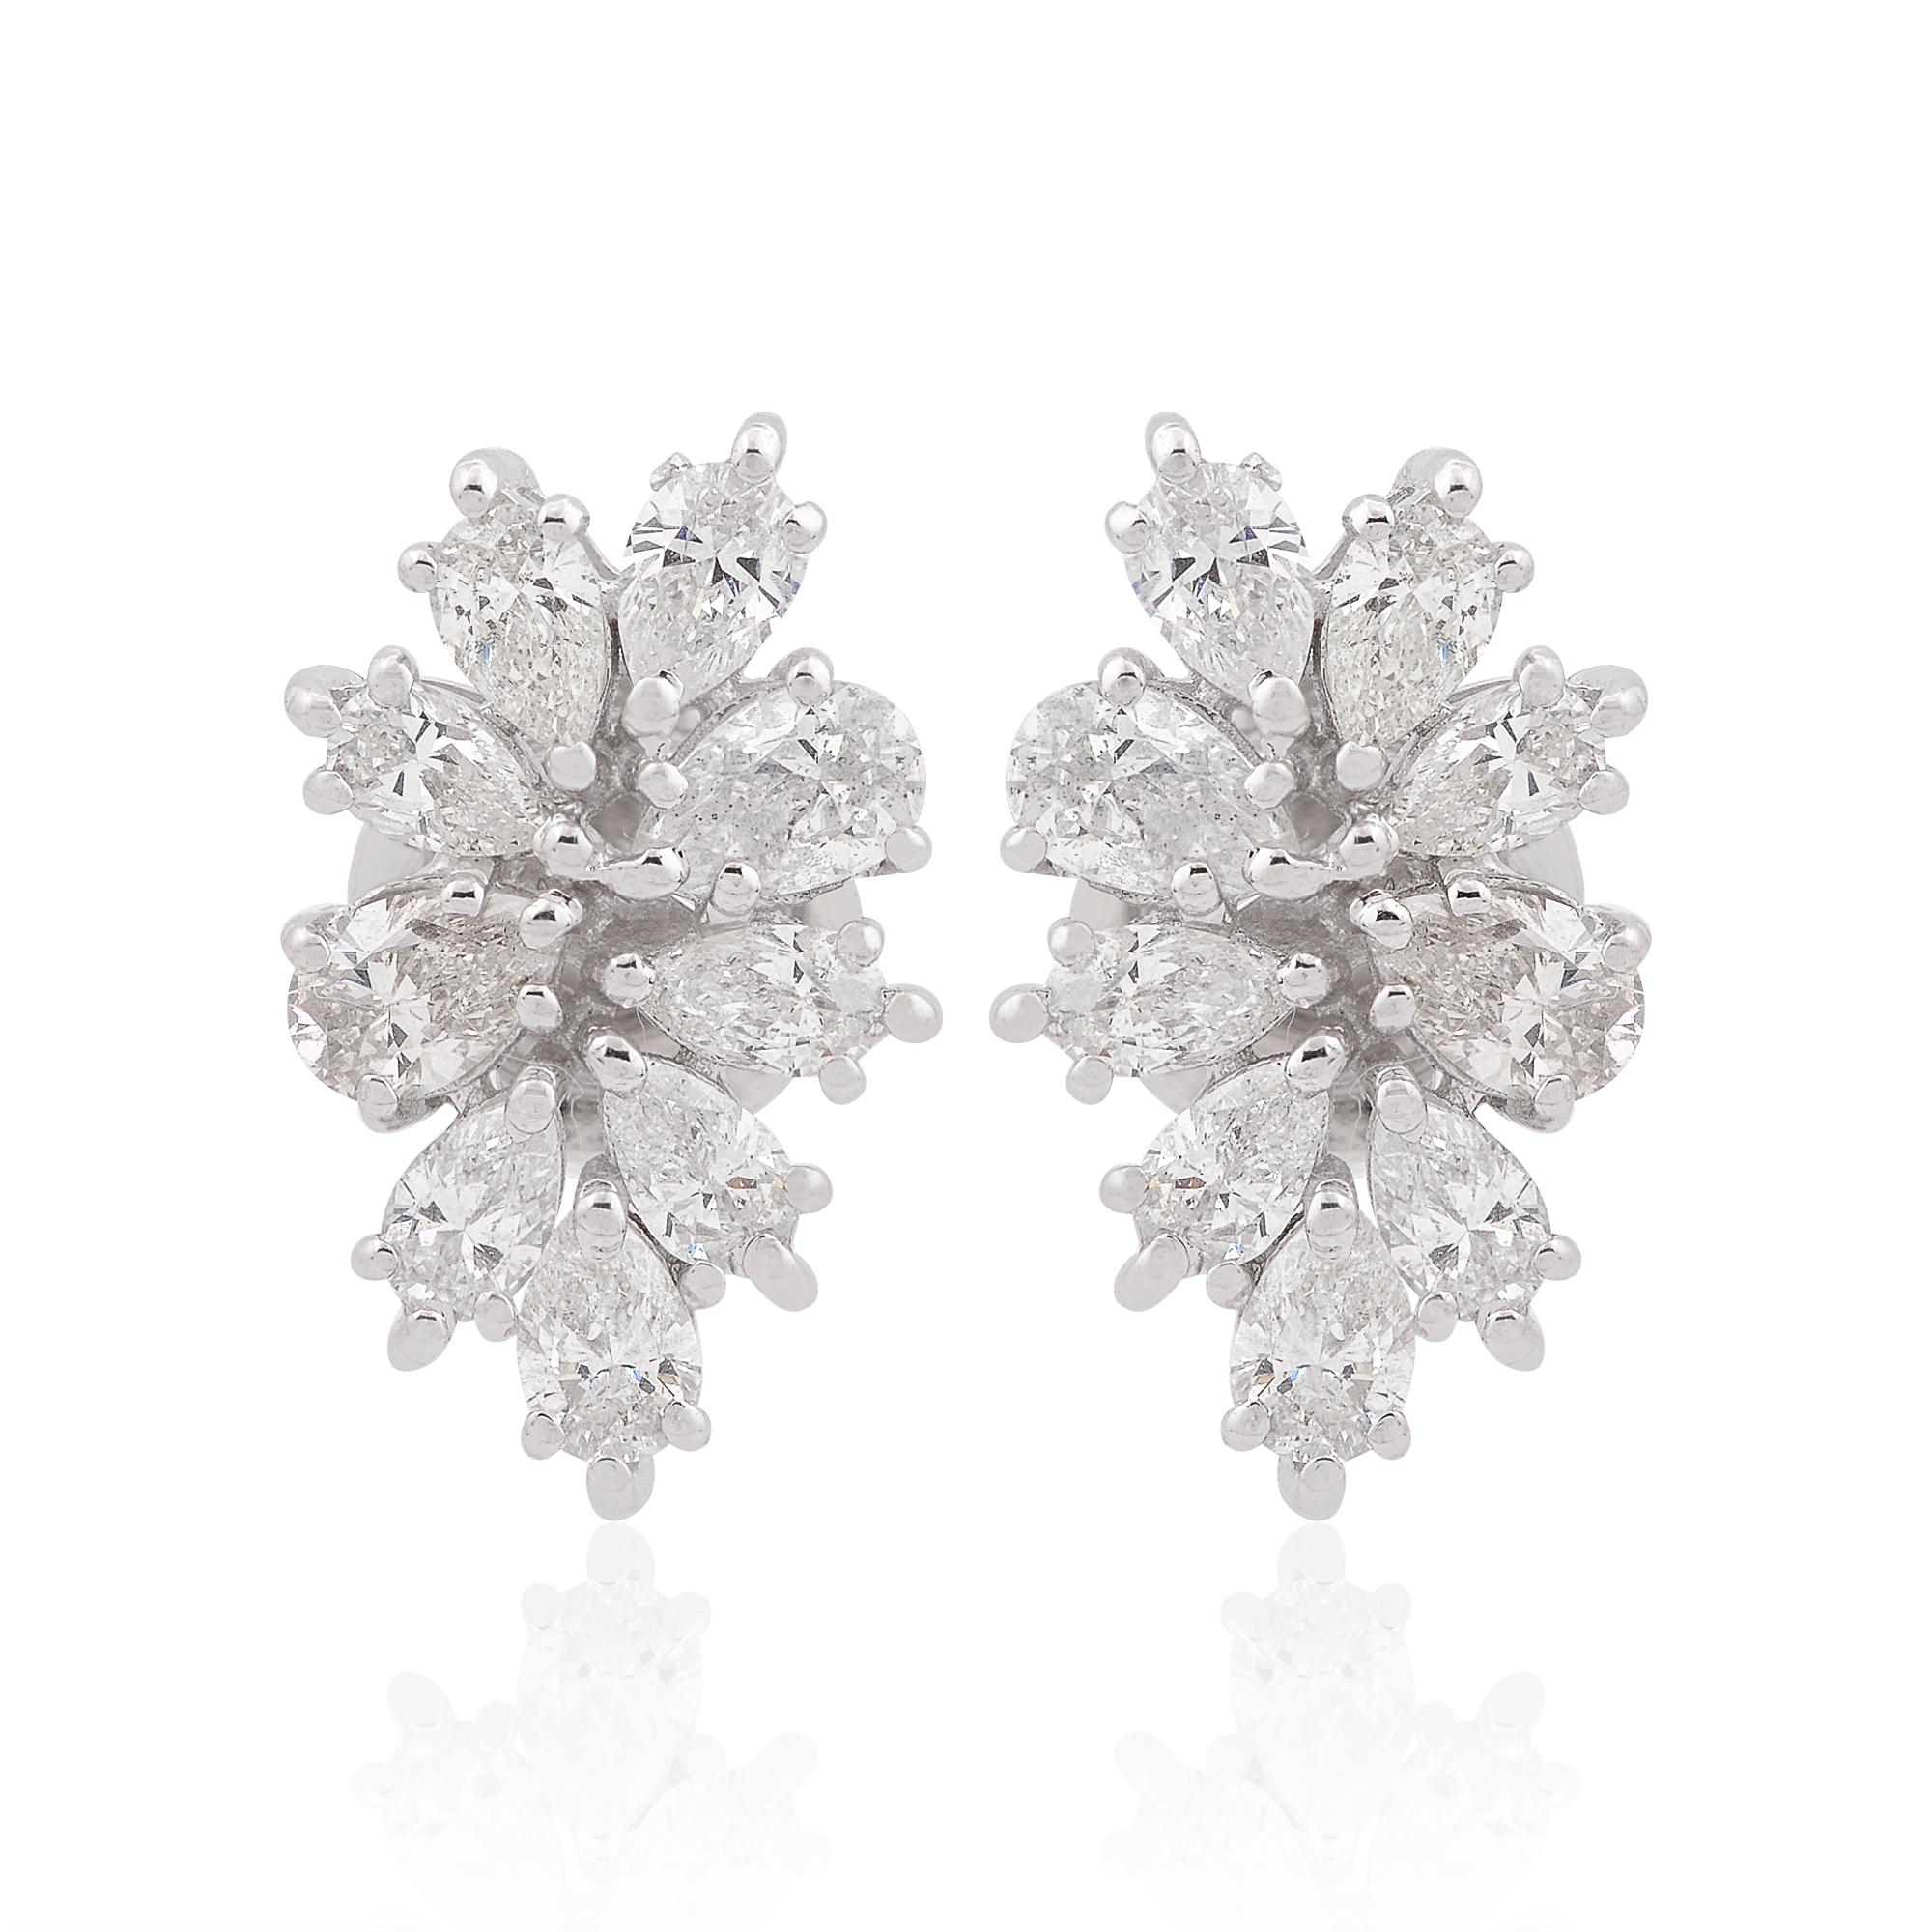 Each earring features a stunning pear-shaped diamond, meticulously selected for its exceptional quality and brilliance. With a combined weight of 1.65 carats, these diamonds sparkle with unparalleled radiance, catching the light with every